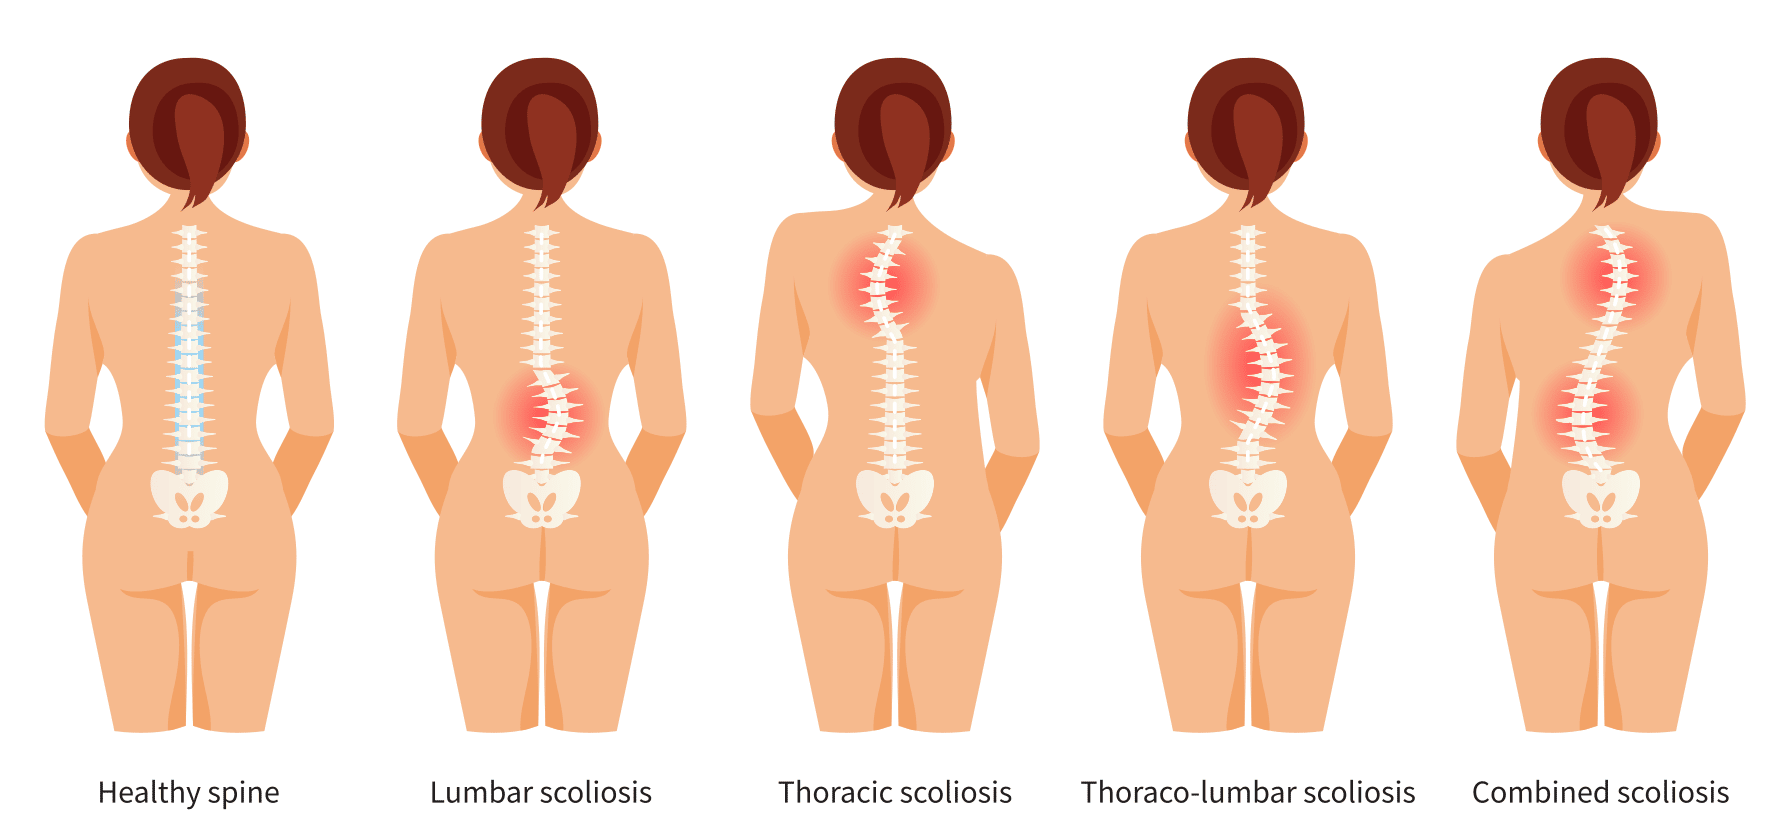 diagram showing a normal spine and a spine with scoliosis